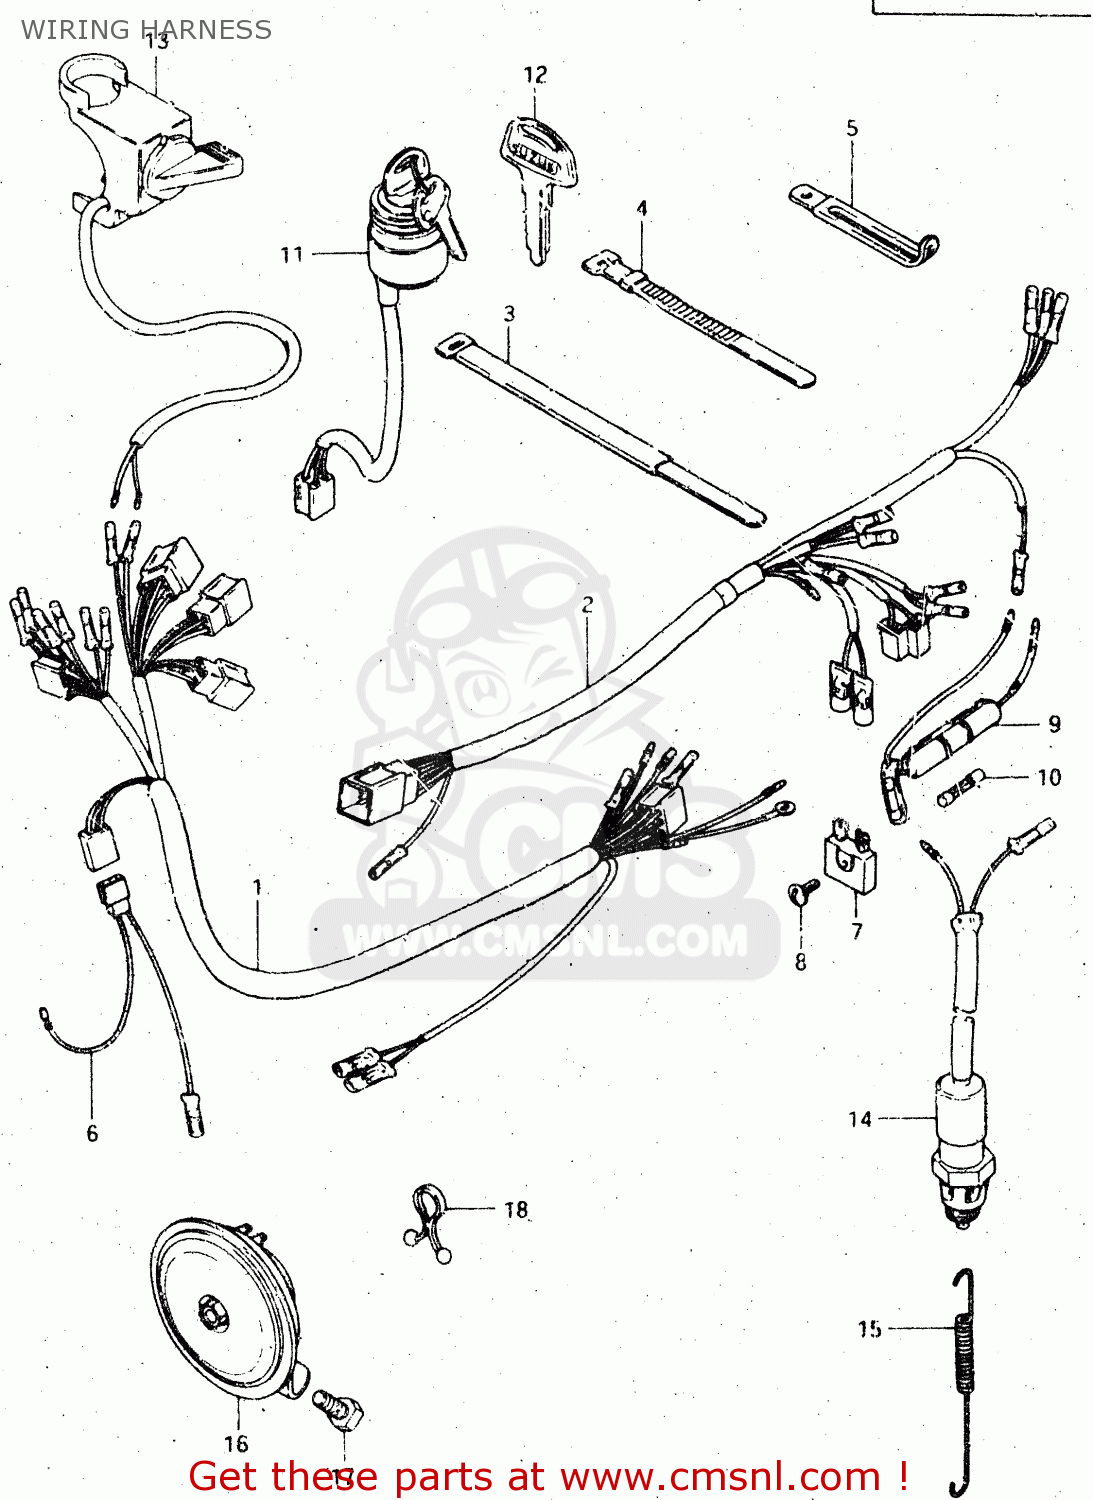 Dr Field And Brush Mower Wiring Diagram from images.cmsnl.com